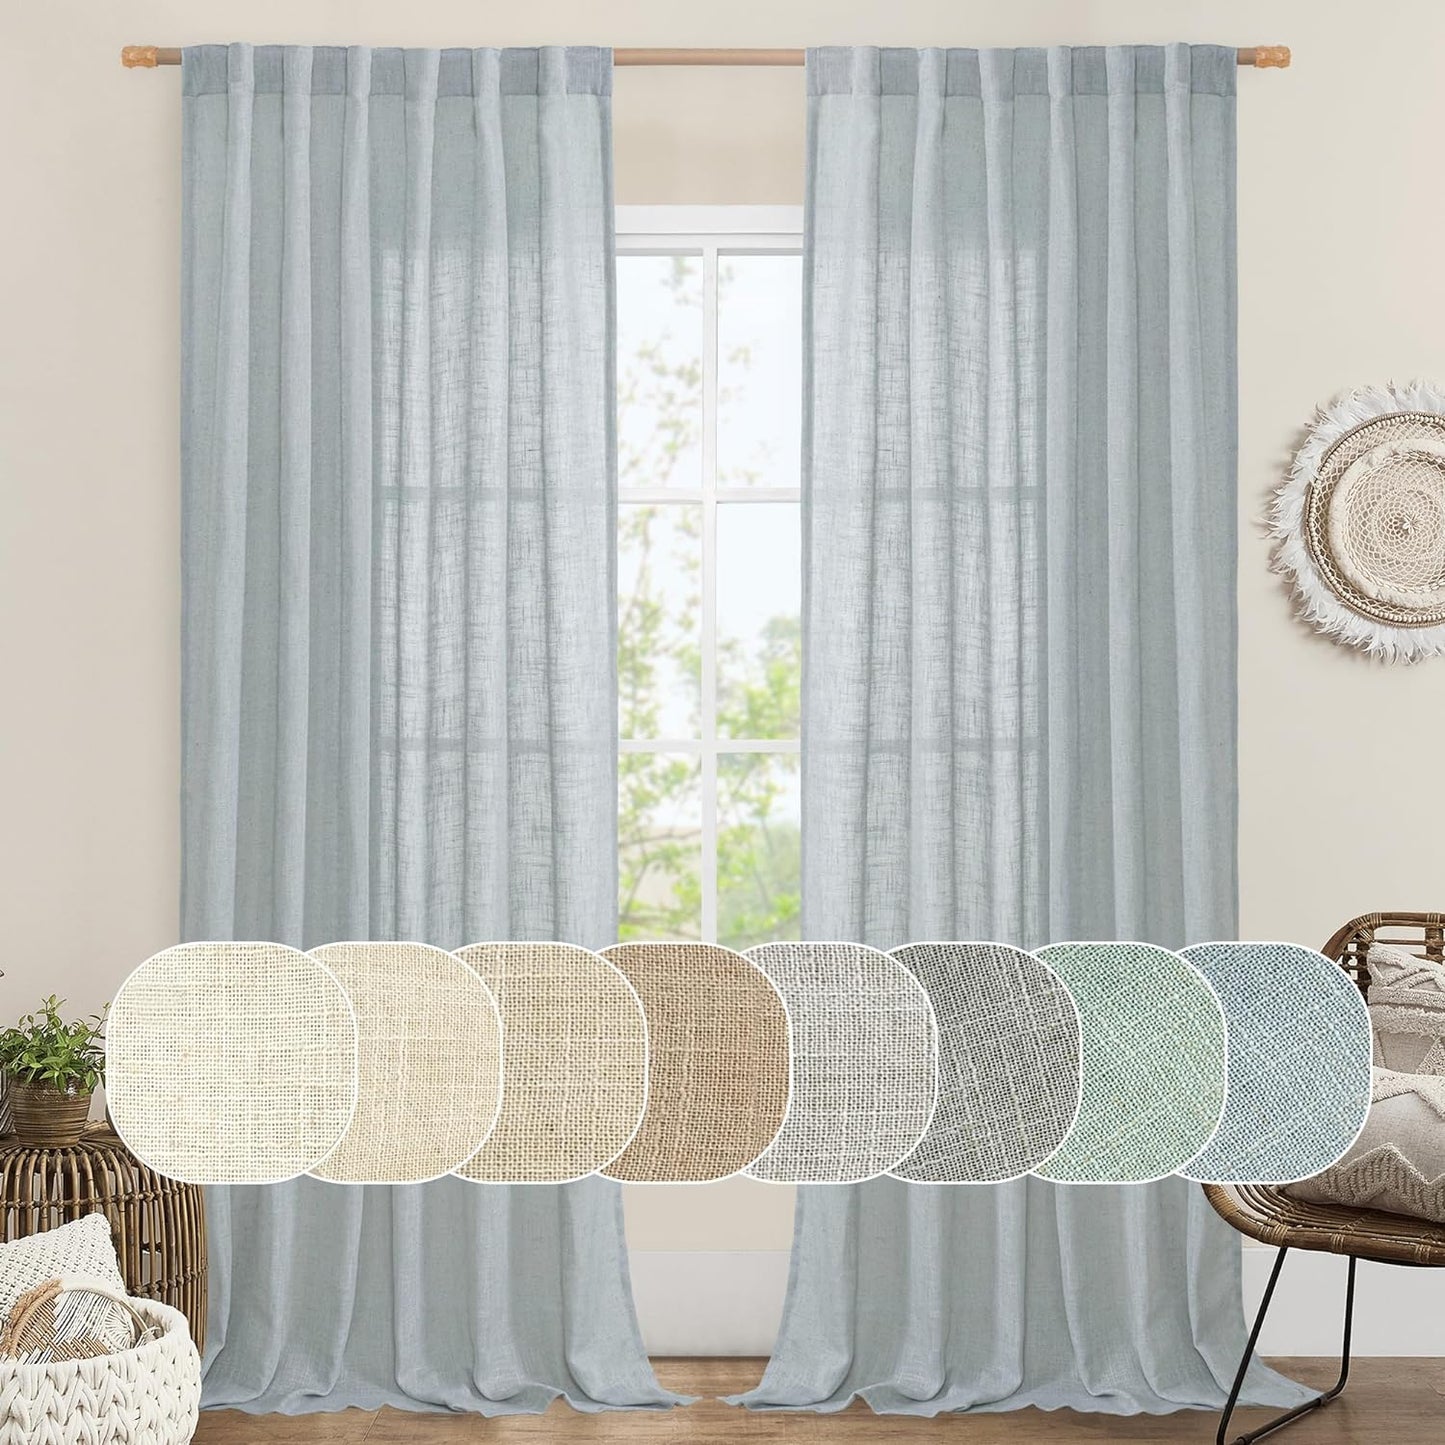 LAMIT Natural Linen Blended Curtains for Living Room, Back Tab and Rod Pocket Semi Sheer Curtains Light Filtering Country Rustic Drapes for Bedroom/Farmhouse, 2 Panels,52 X 108 Inch, Linen  LAMIT Greyish Blue 52W X 95L 